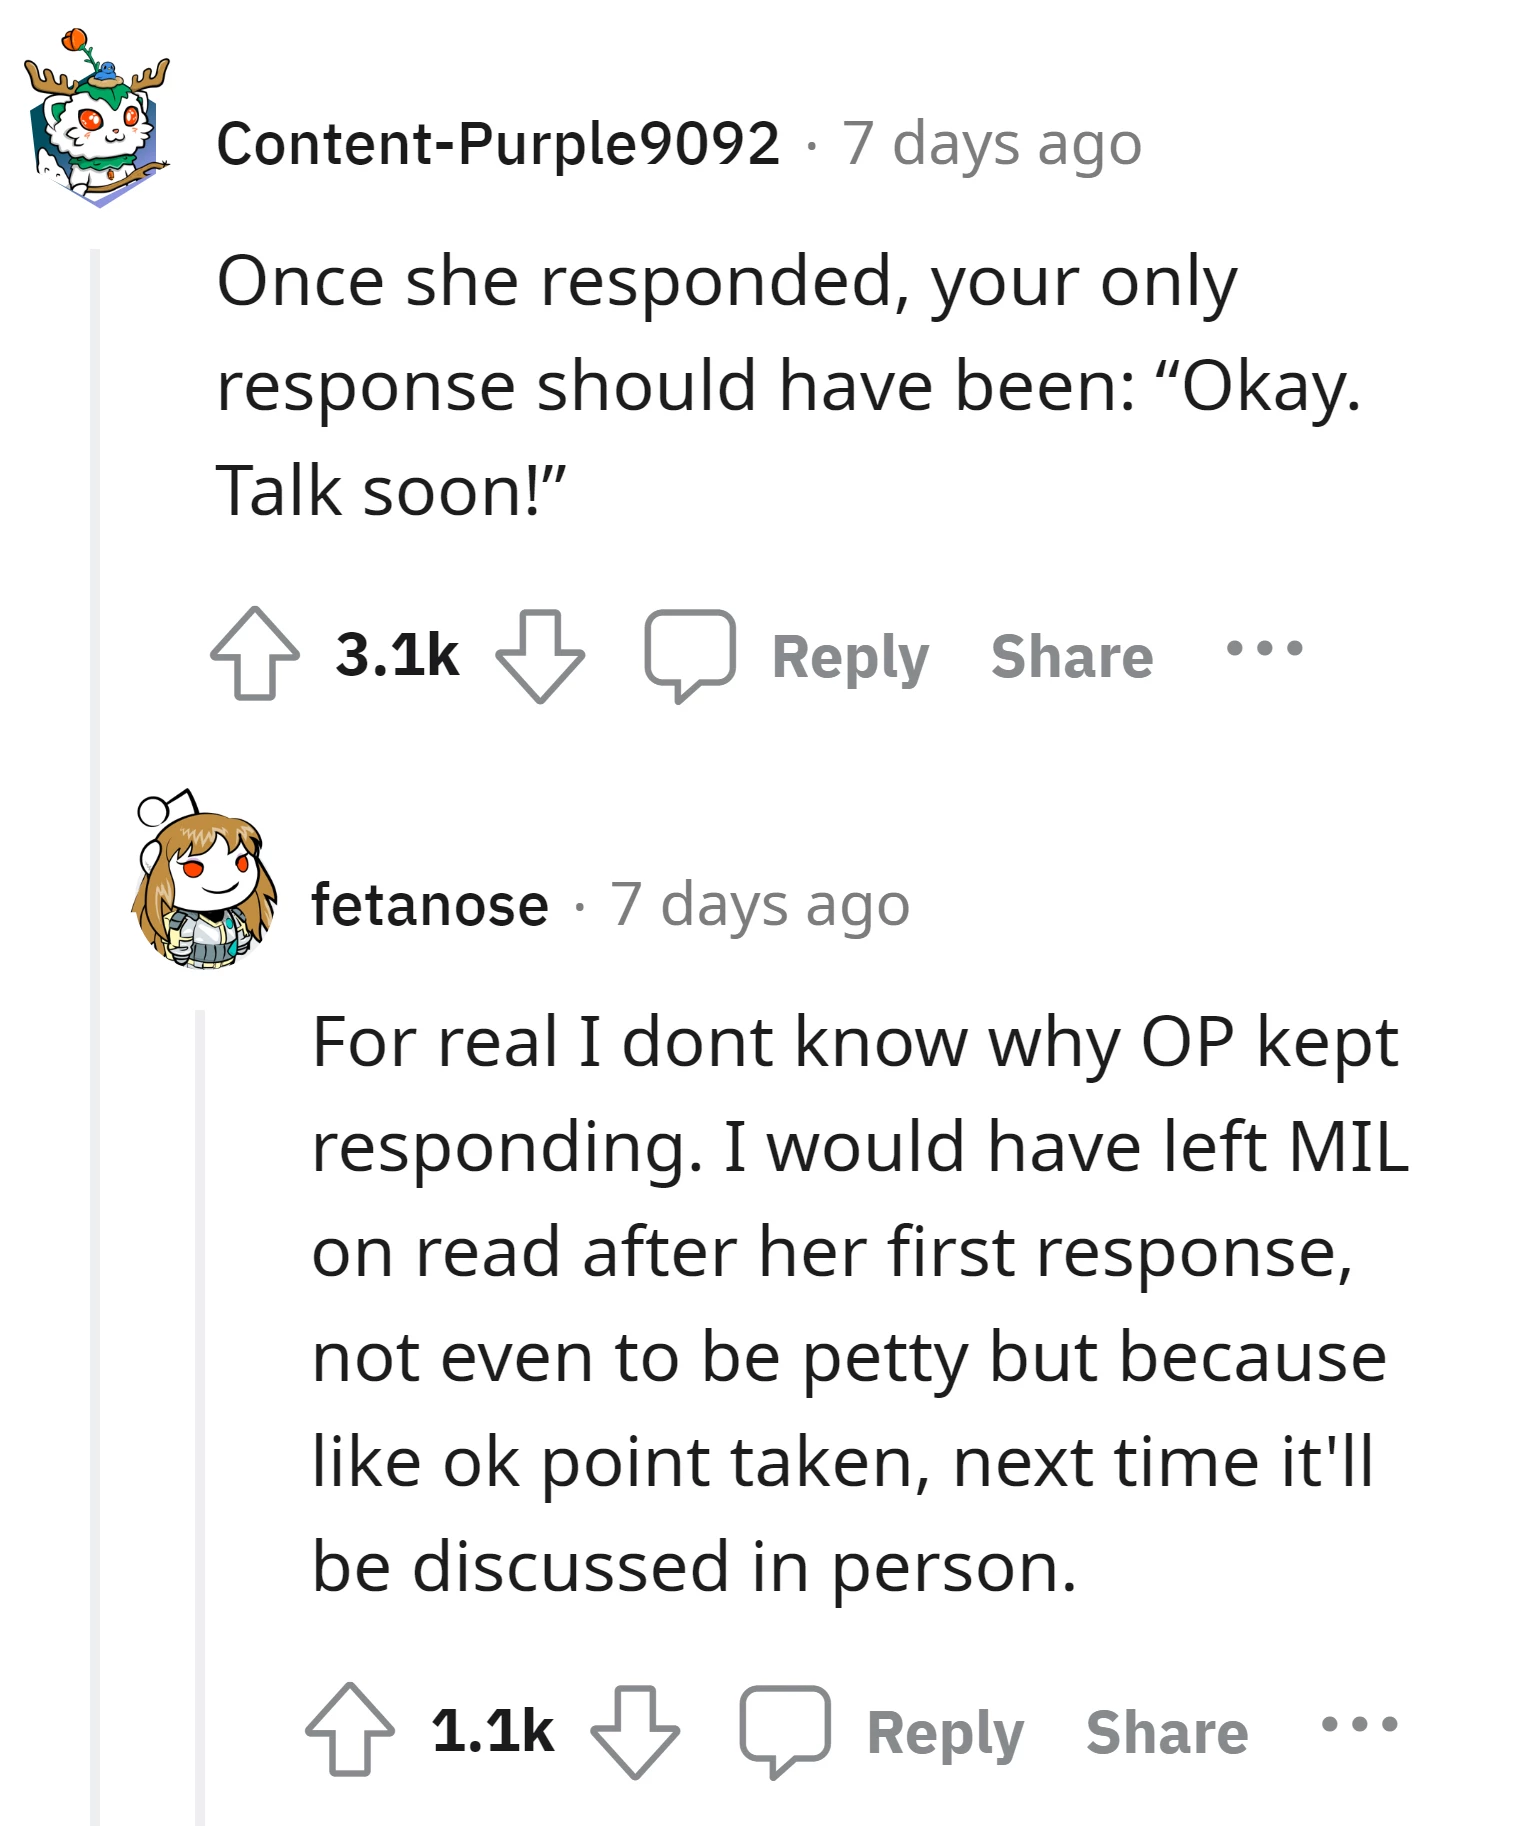 OP's appropriate reply should have been a simple acknowledgment like "Okay. Talk soon!"